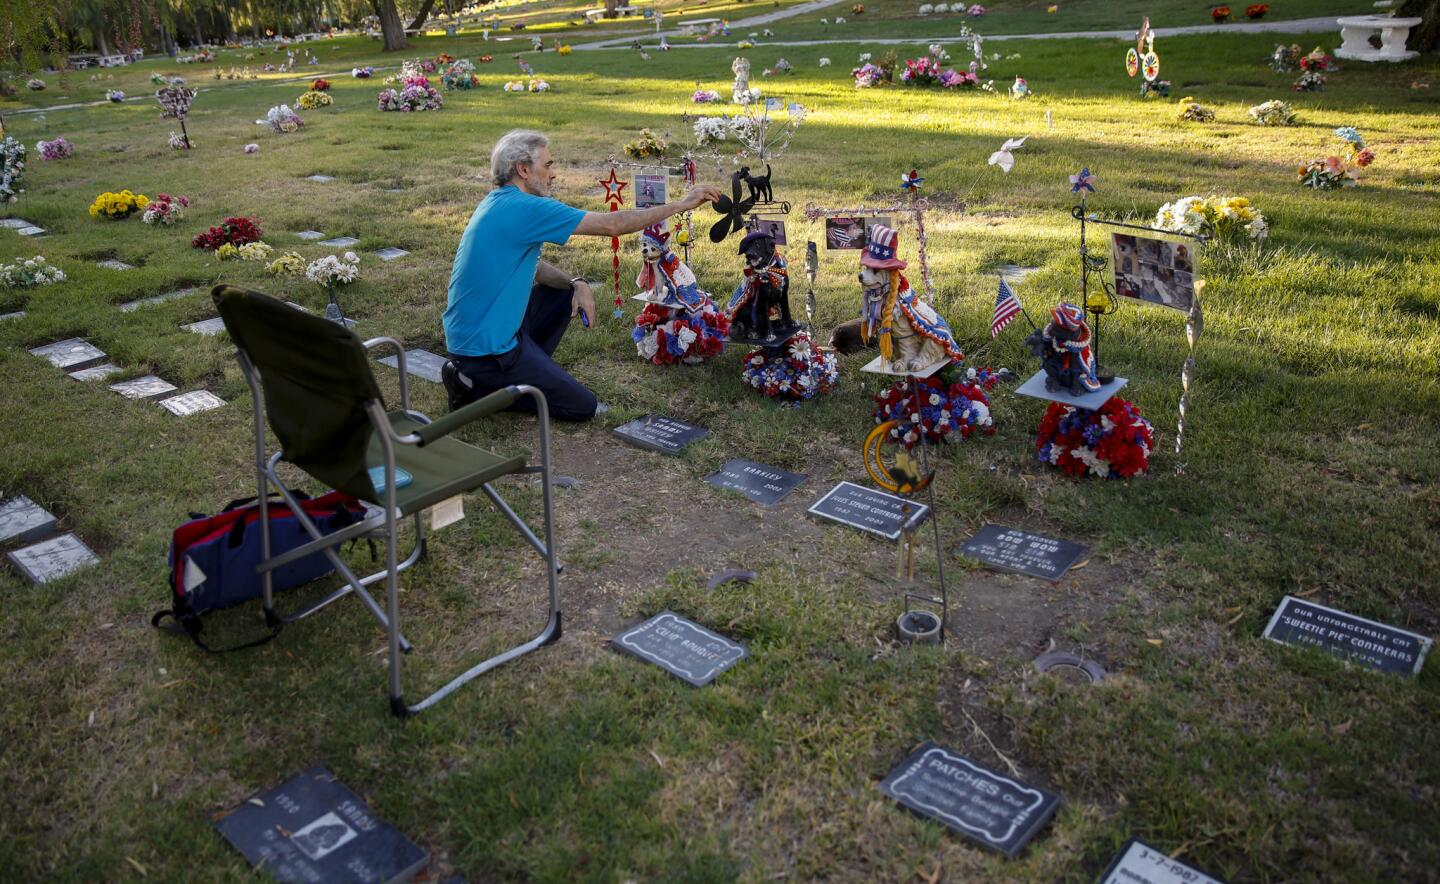 Fred Wodnicki of North Hollywood tends to the decorations he maintains where his four pets are buried at Los Angeles Pet Memorial Park in Calabasas. Wodnicki has been coming most Saturdays since 2006, changing the decorations to coordinate with the holidays.